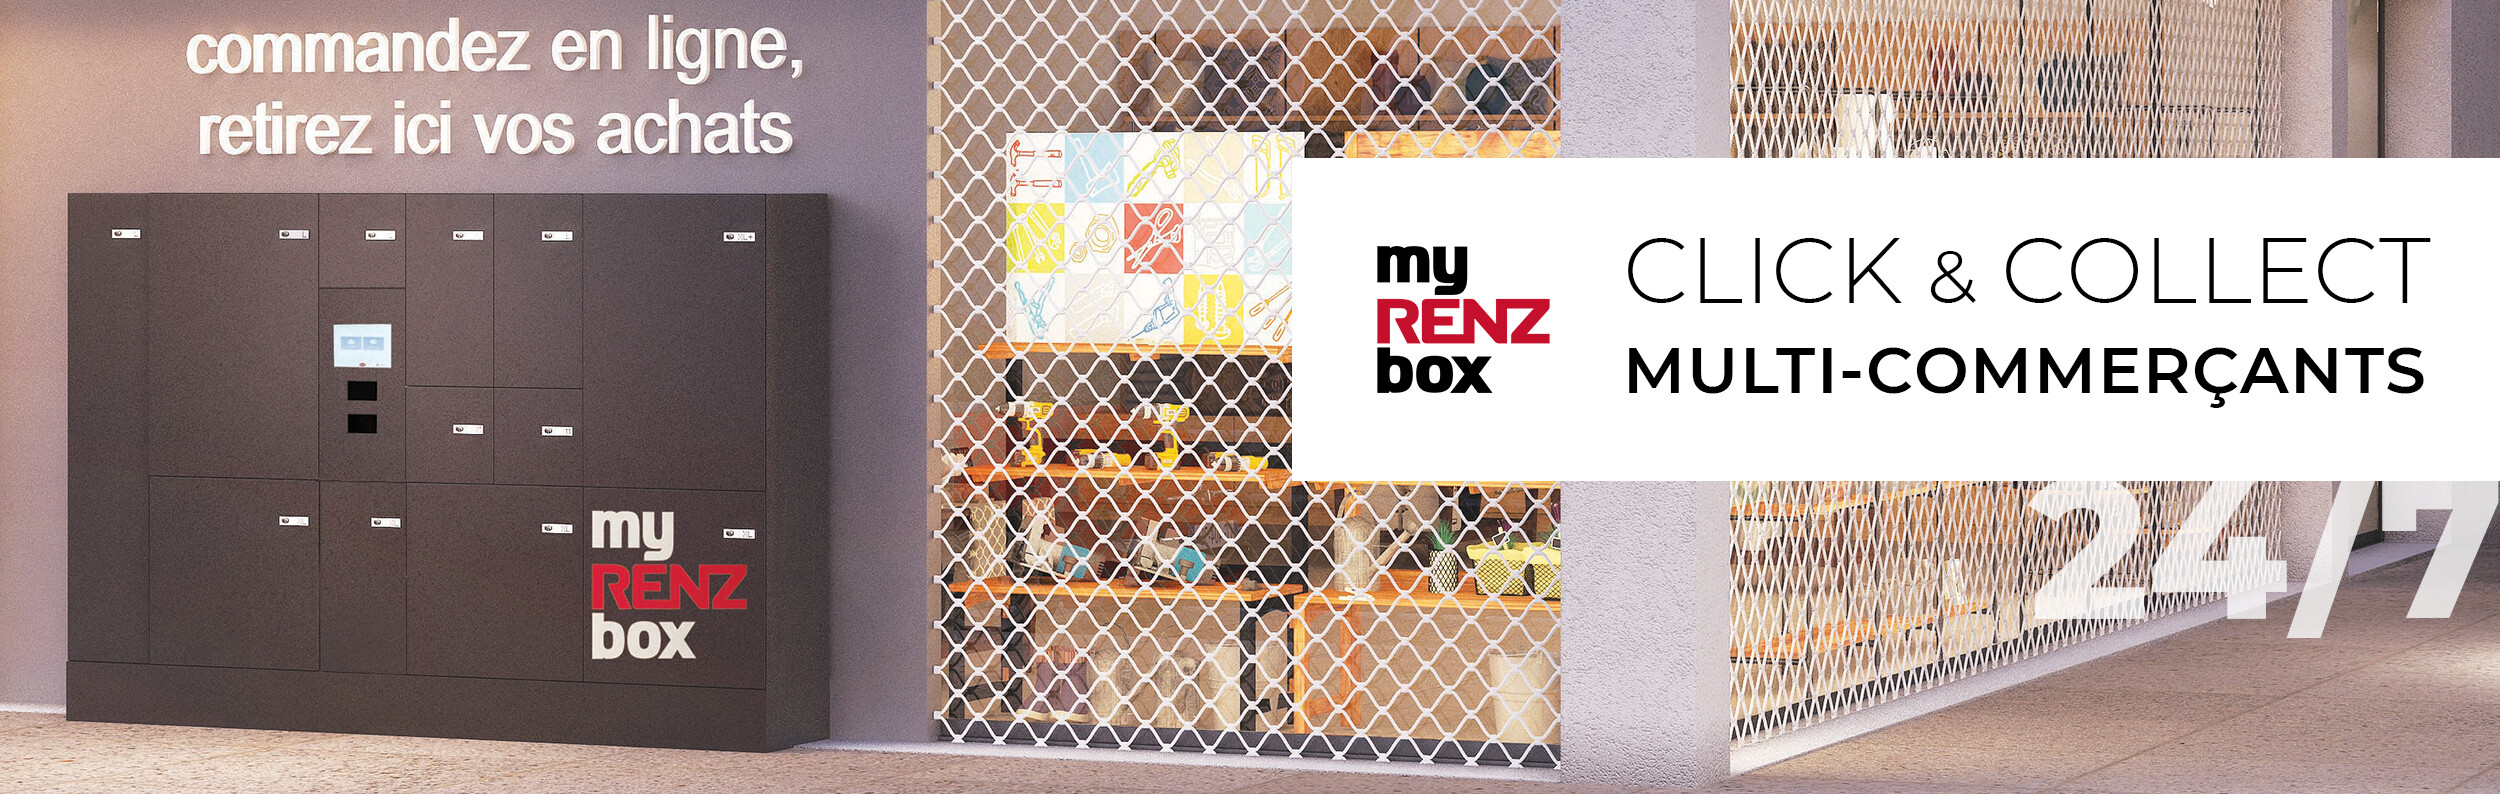 myRENZbox click and collect multi commerçants 